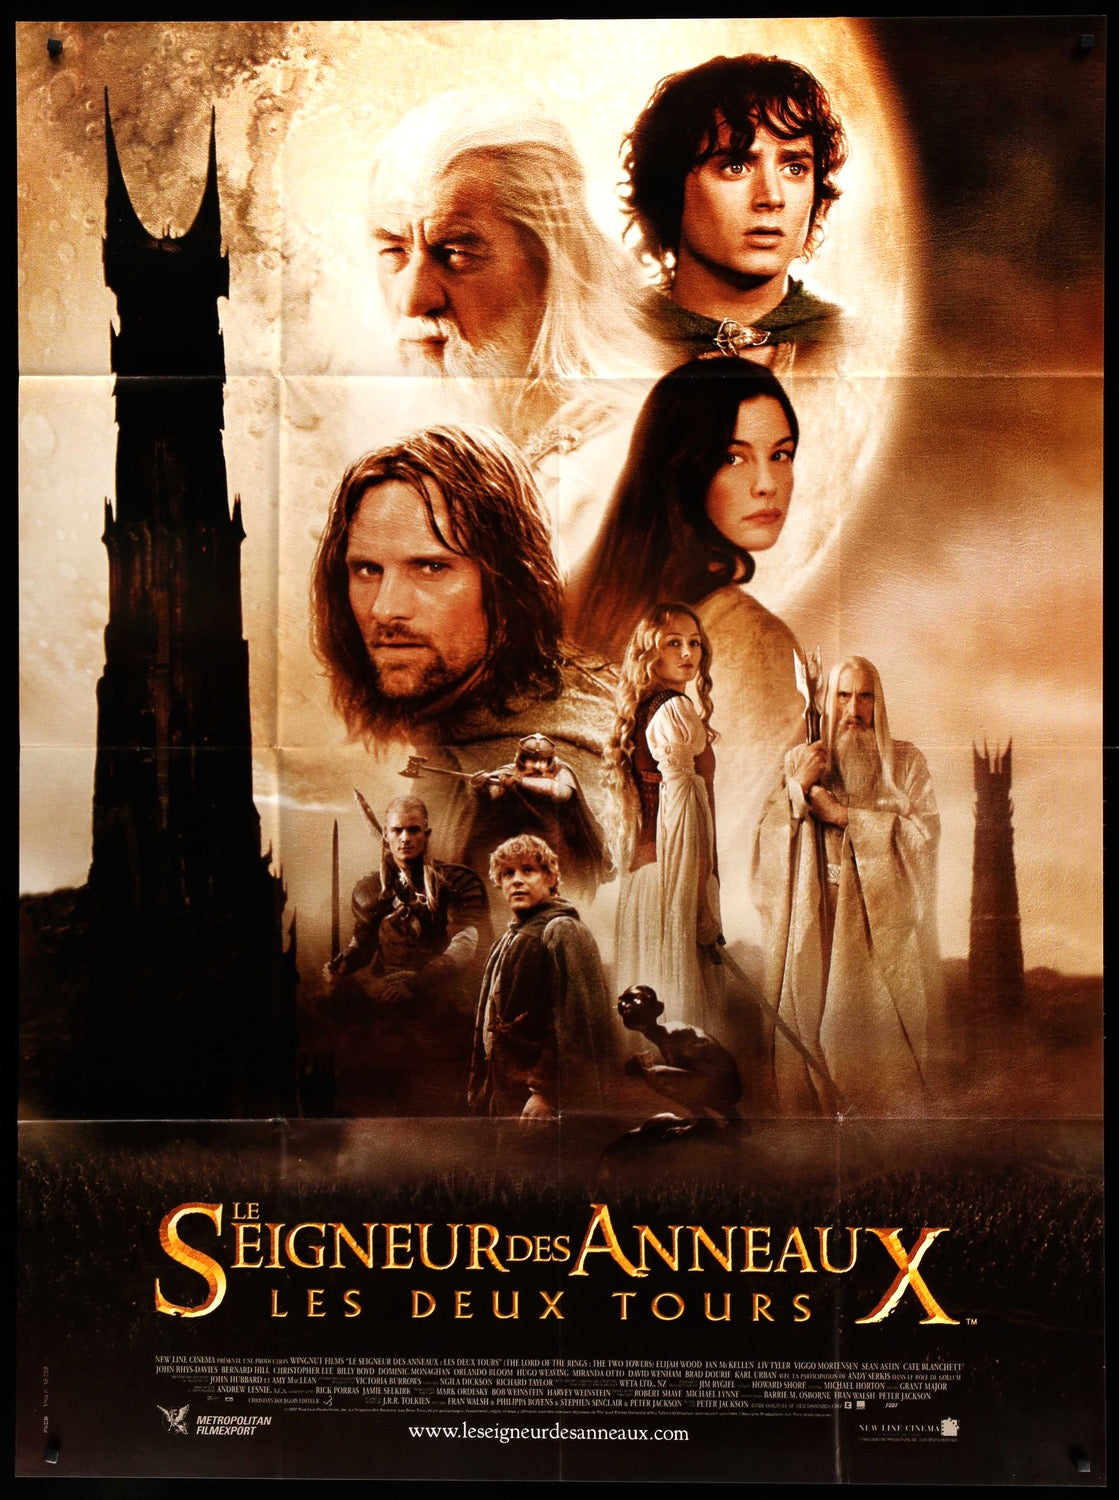 Lord of the Rings: The Two Towers (2002) original movie poster for sale at Original Film Art